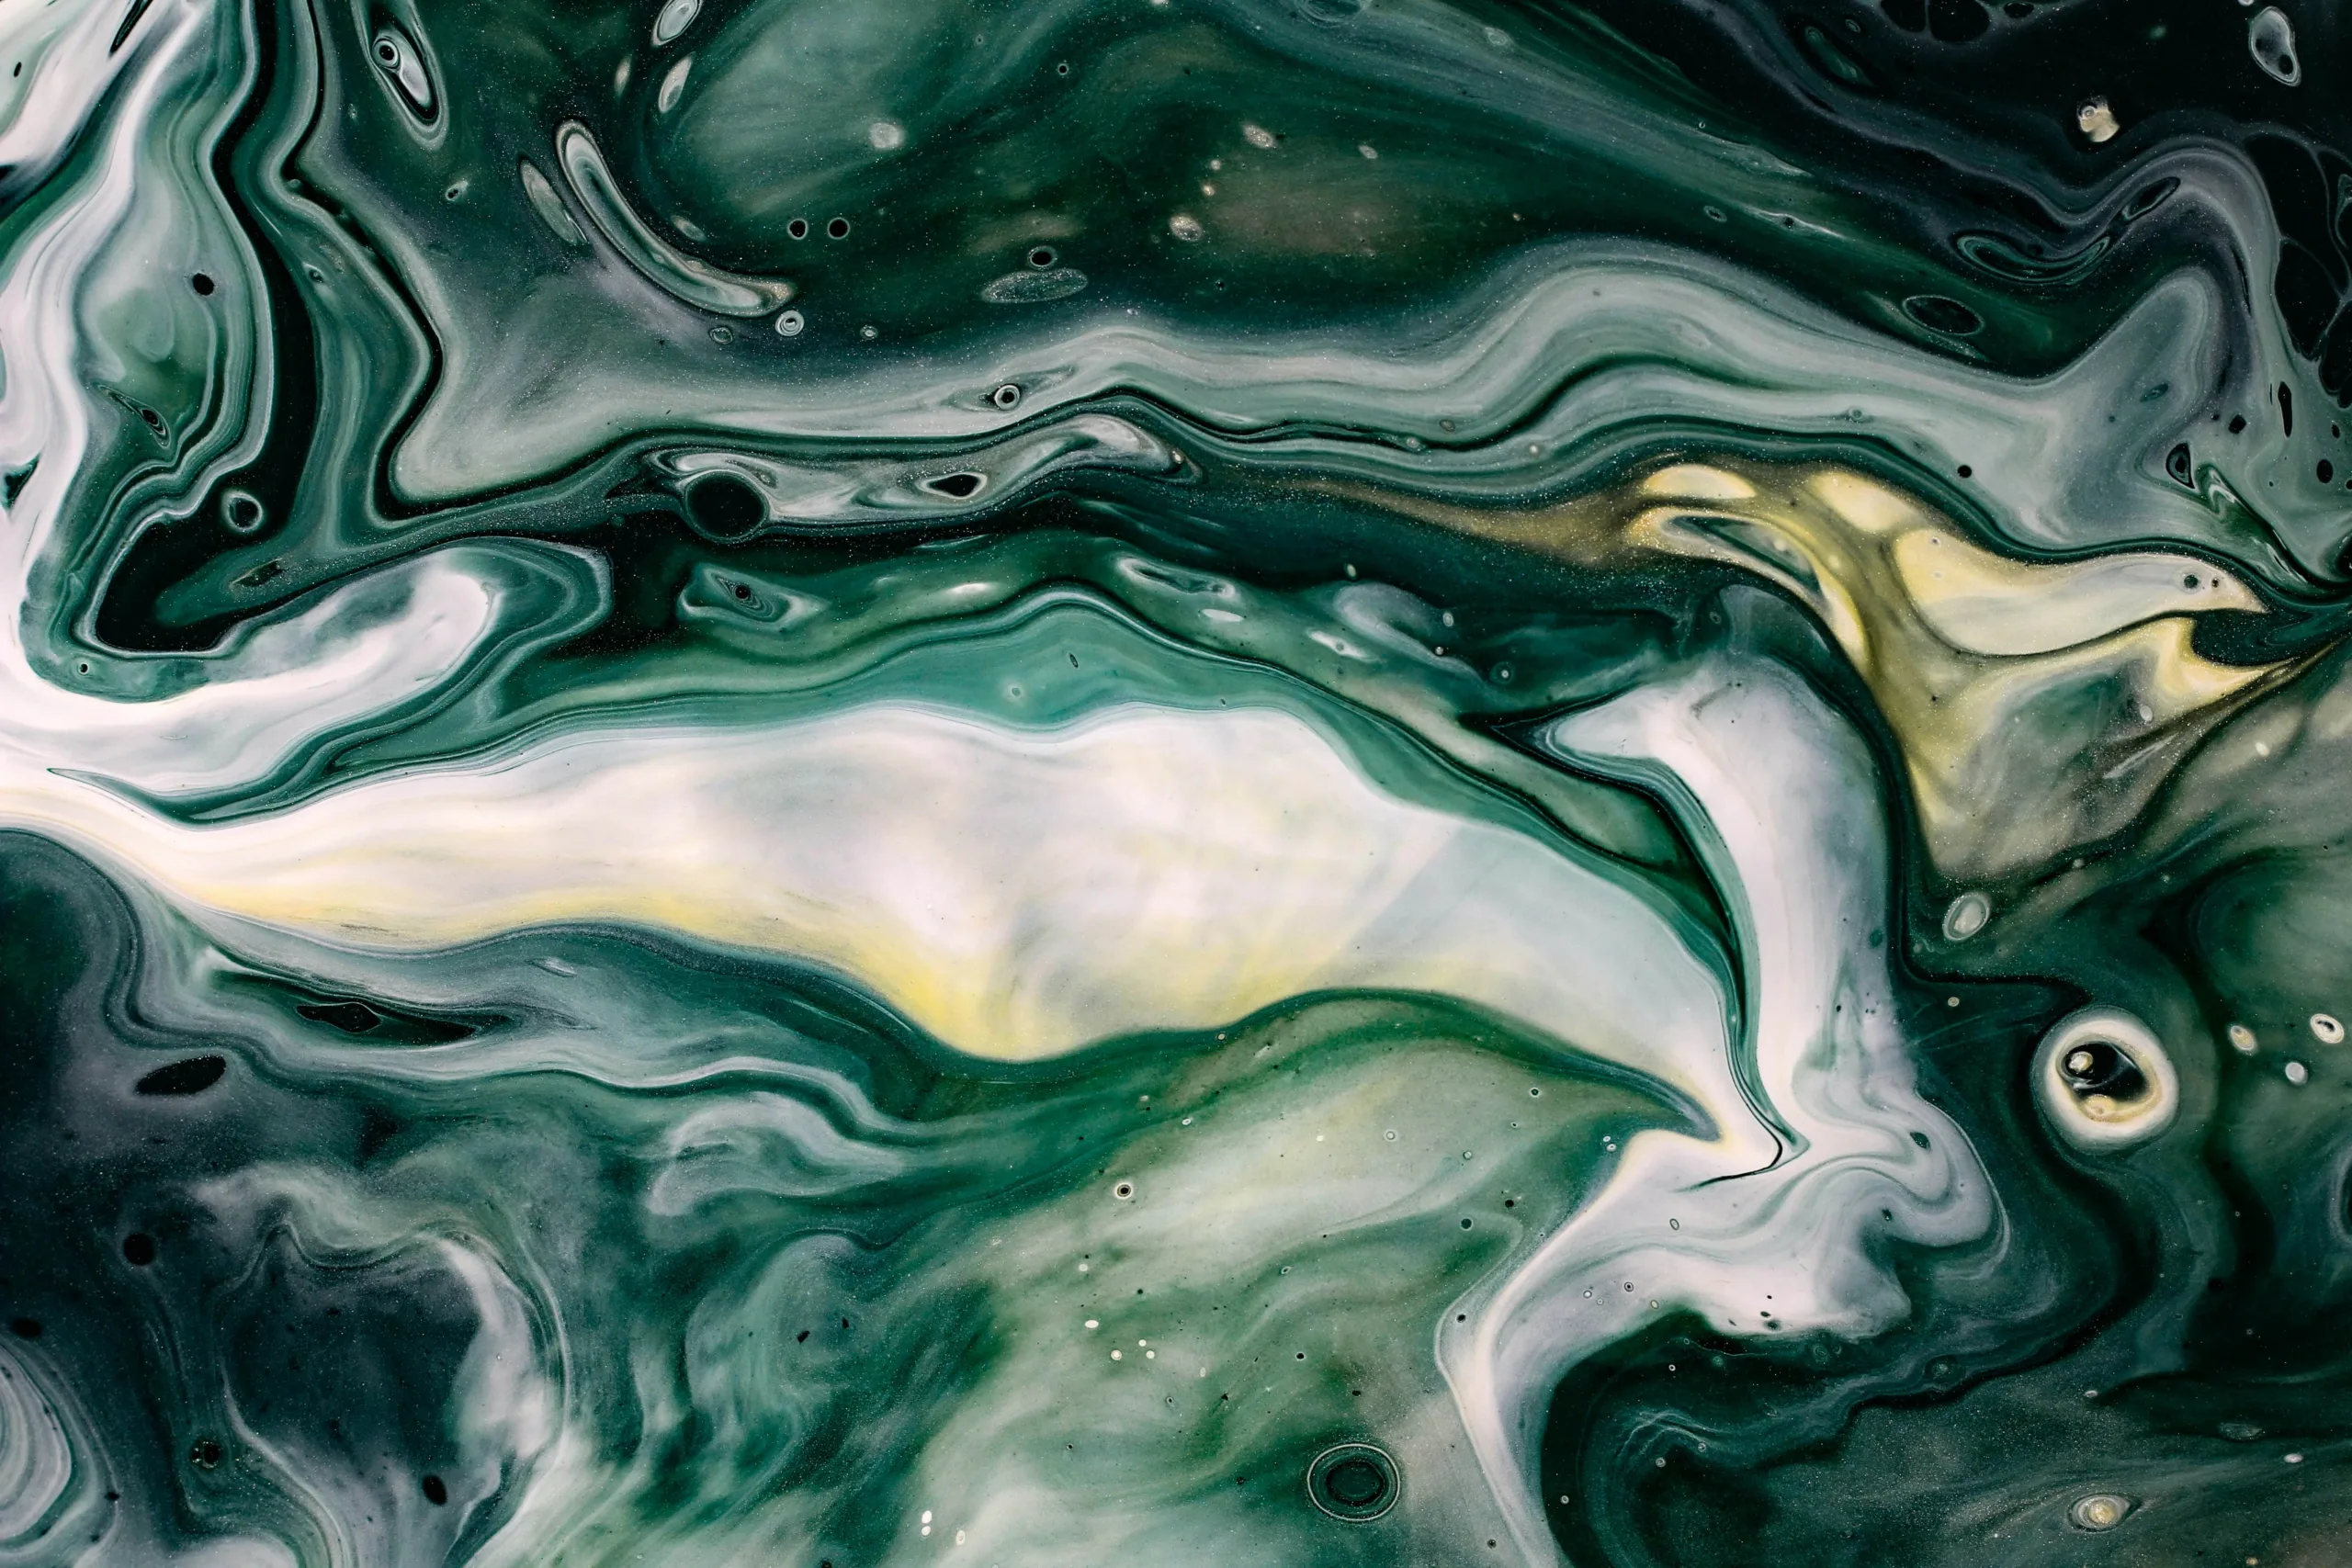 Abstract_pouring paint_susan-wilkinson-_GIAbw2Ml1E-unsplash-min